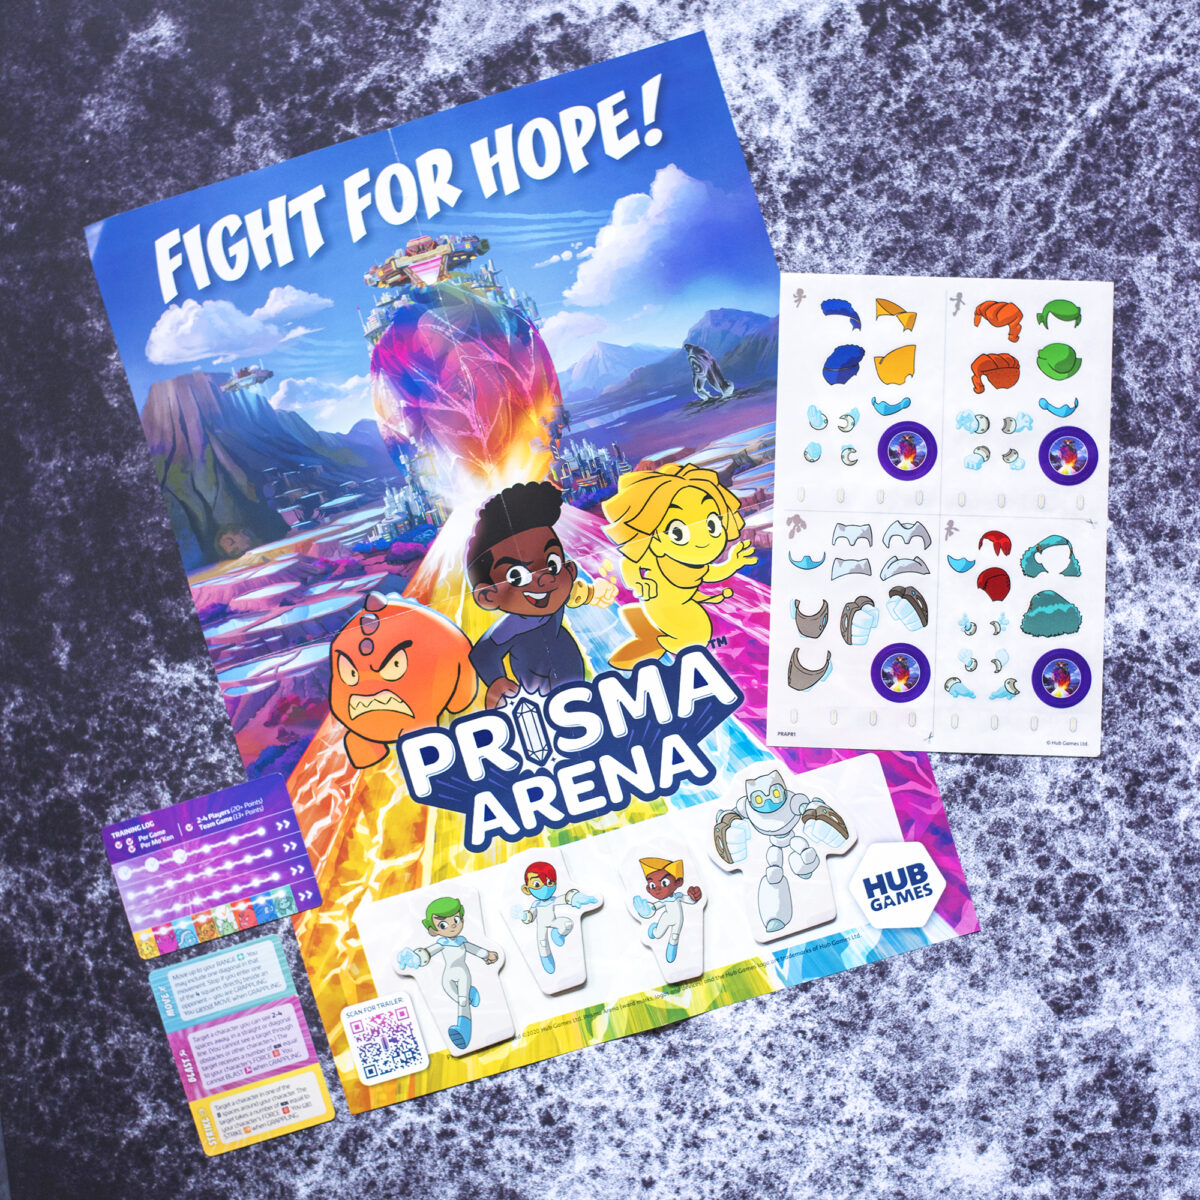 Prisma Arena by Hub Games Promotional Pack. Photo shoes the stickers, poster, heroes and cards that are in the set on a black cracked background.